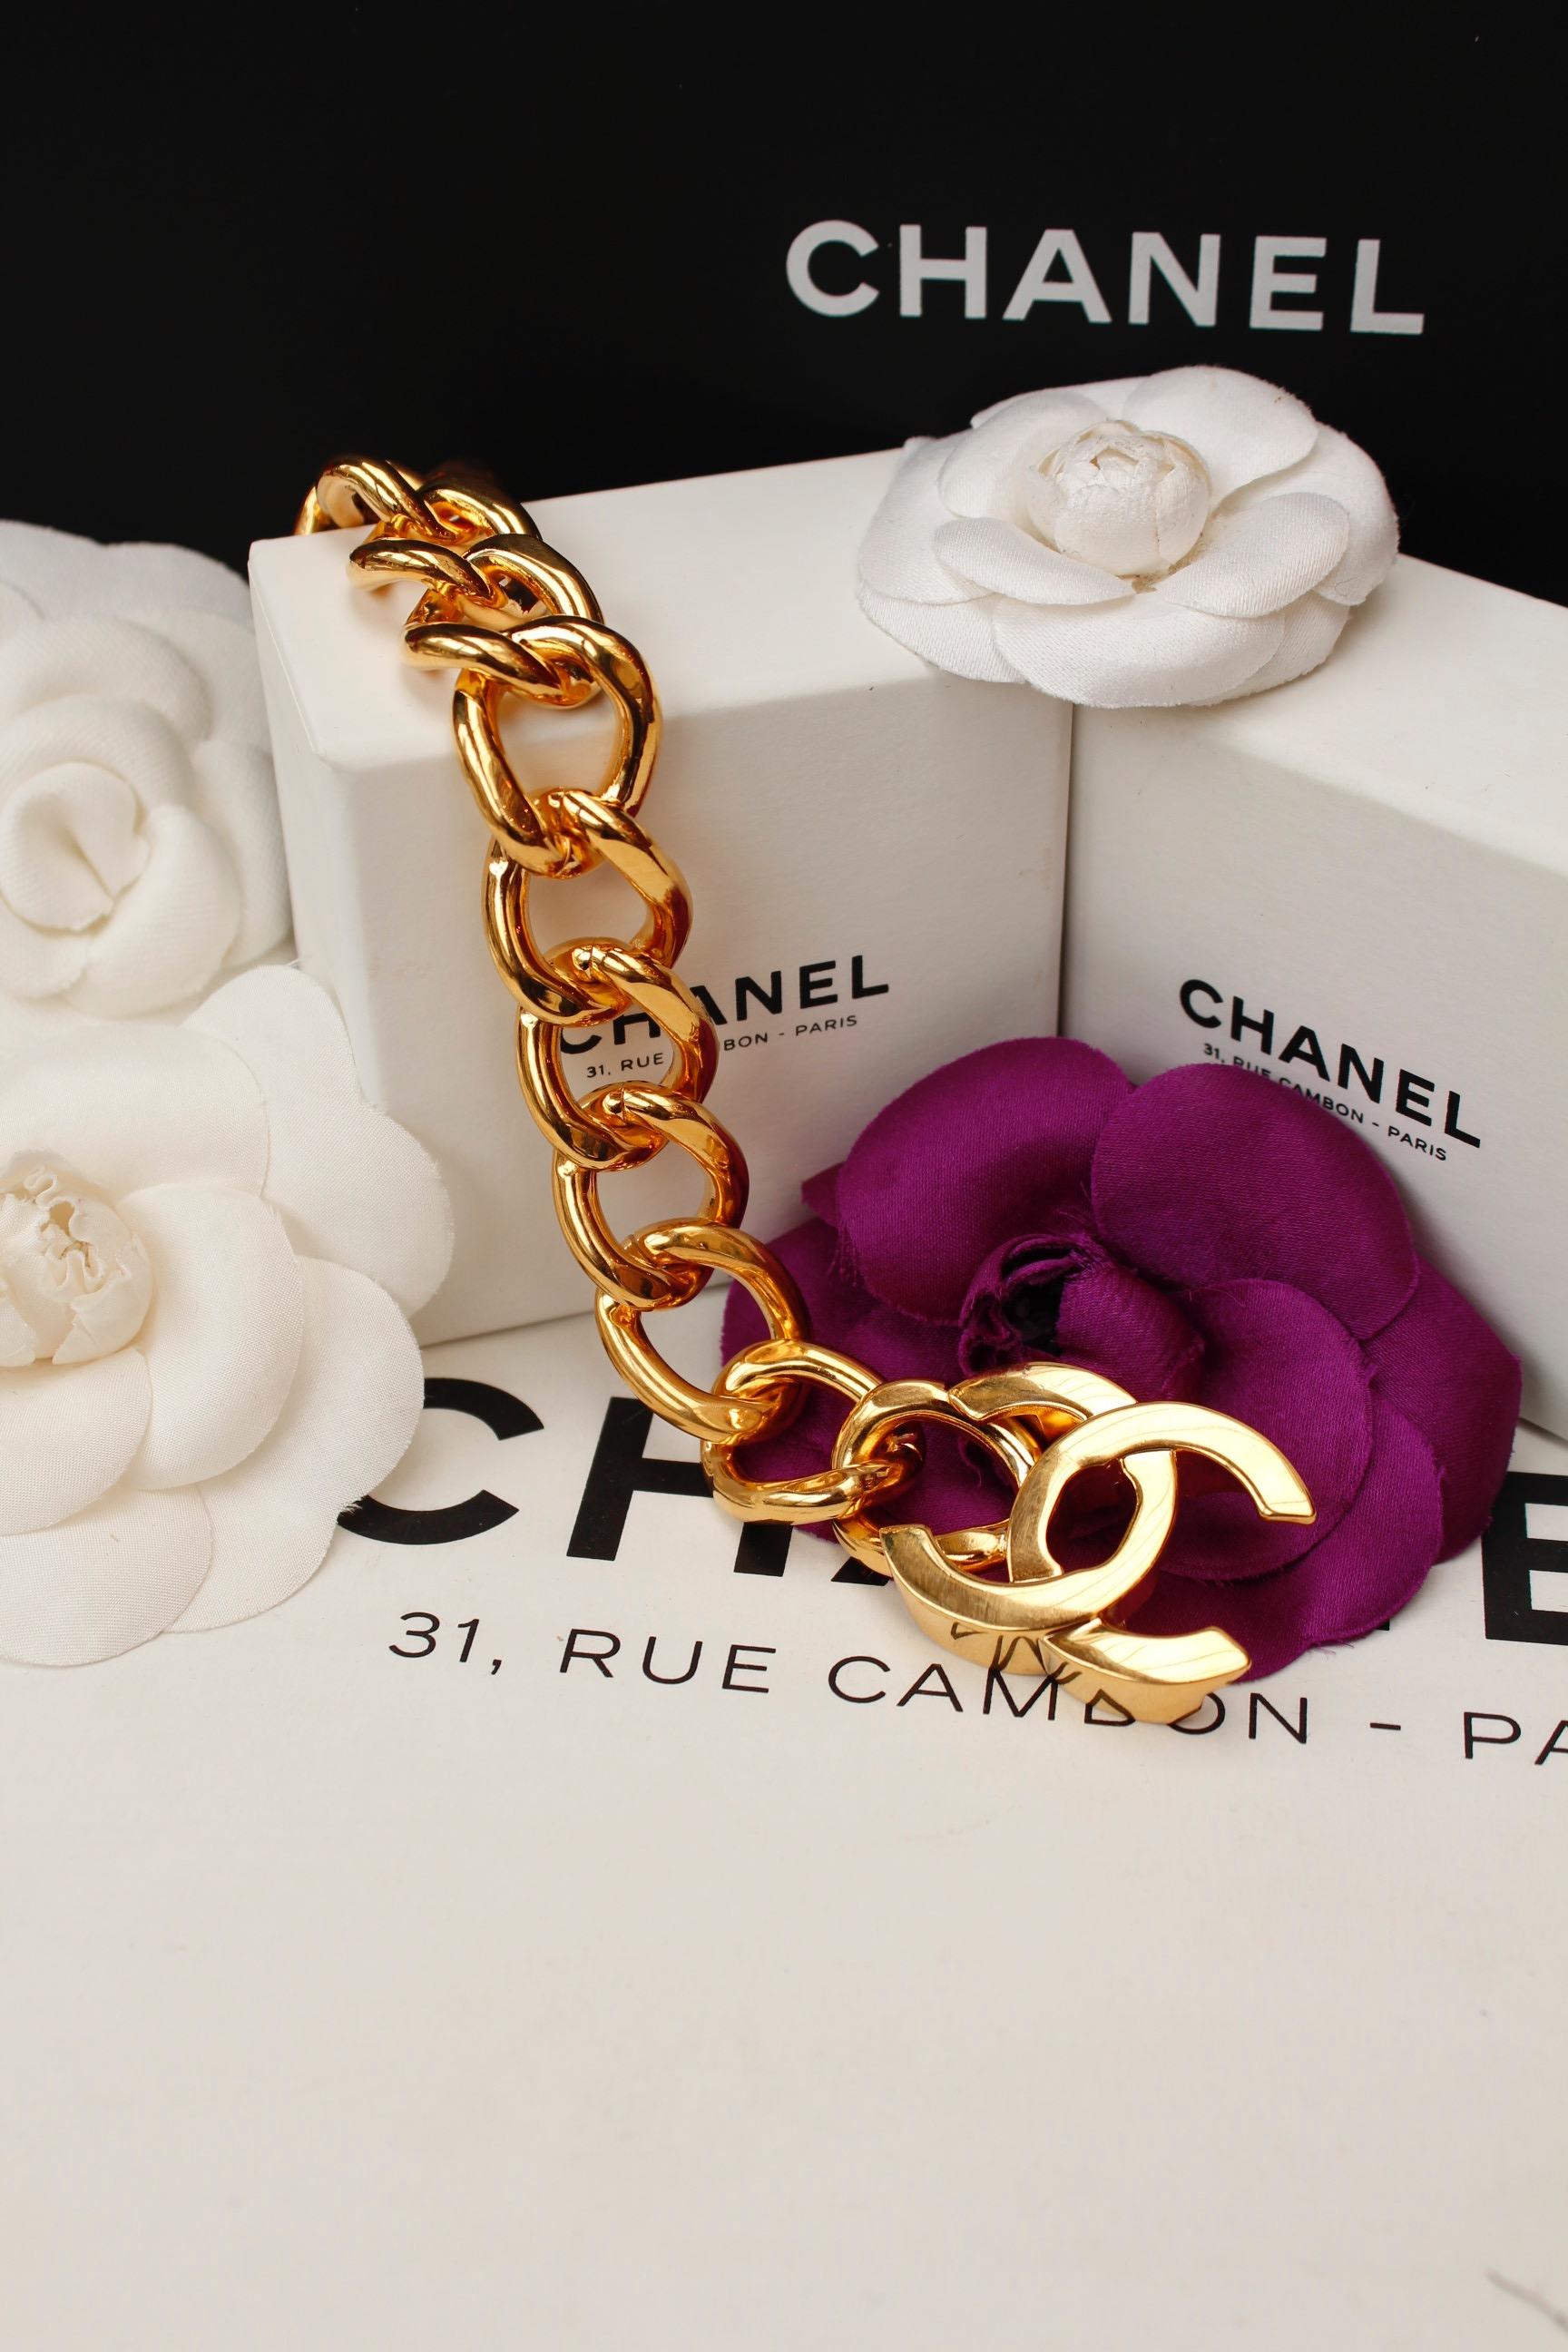 CHANEL (Made in France)
Lovely wide gilted metal chain bracelet adorned with a famous CC turnlock clasp. Iconic model.

1996 Spring Summer Collection.

Length 21 cm (8.2 in).

Very good condition.